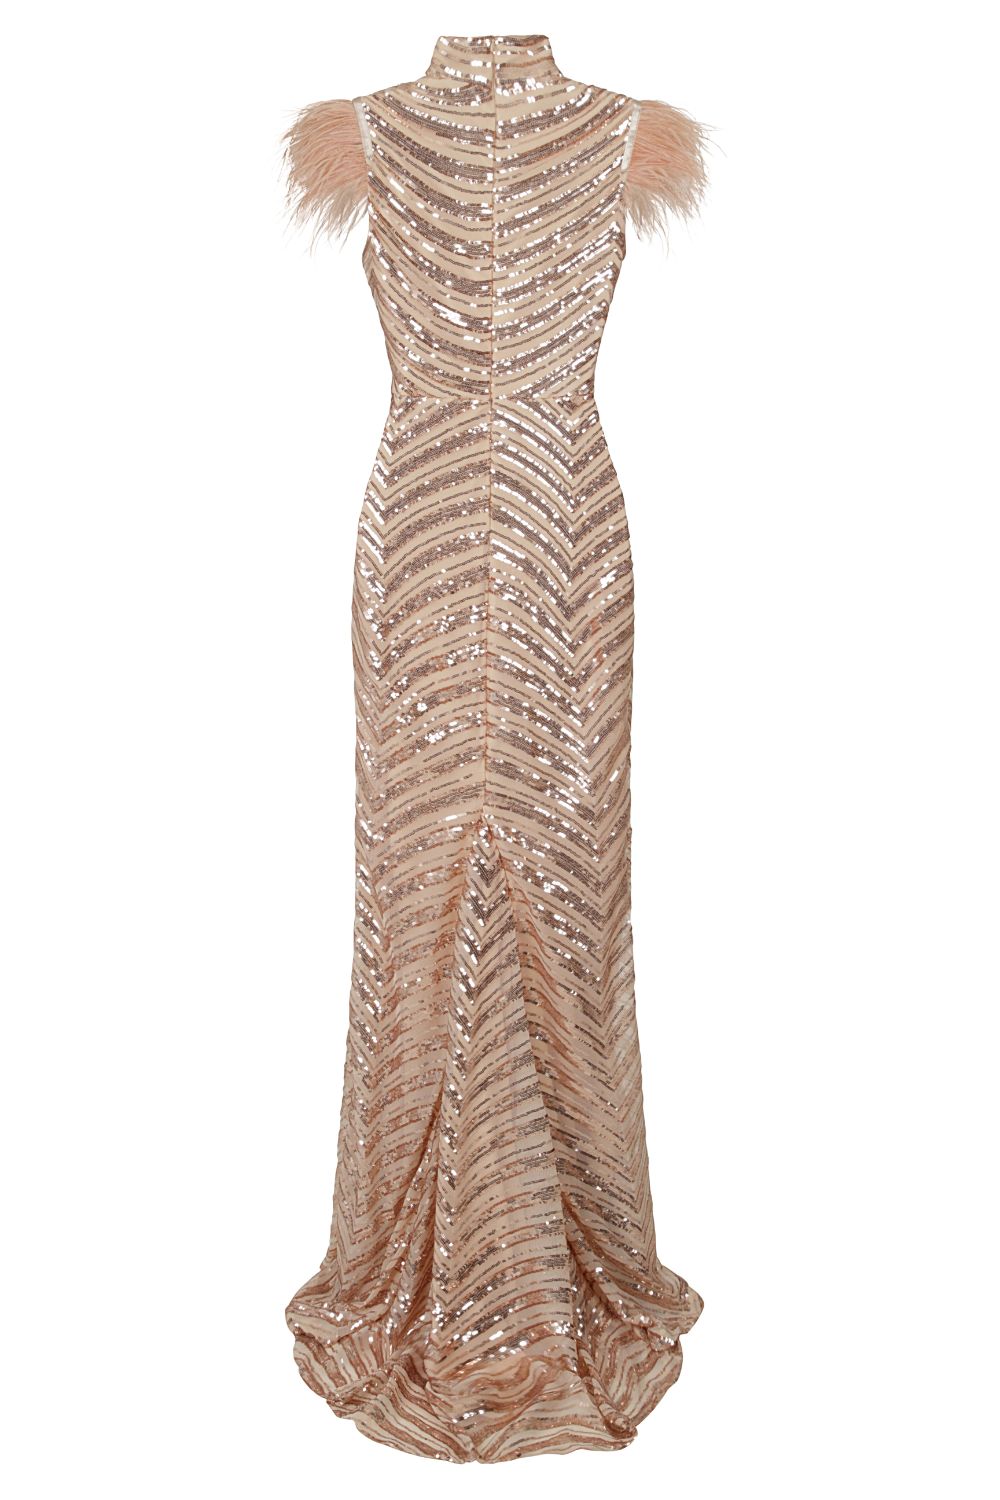 Power Vip Rose Gold Luxe Feather Shoulder Sequin Illusion Maxi Dress